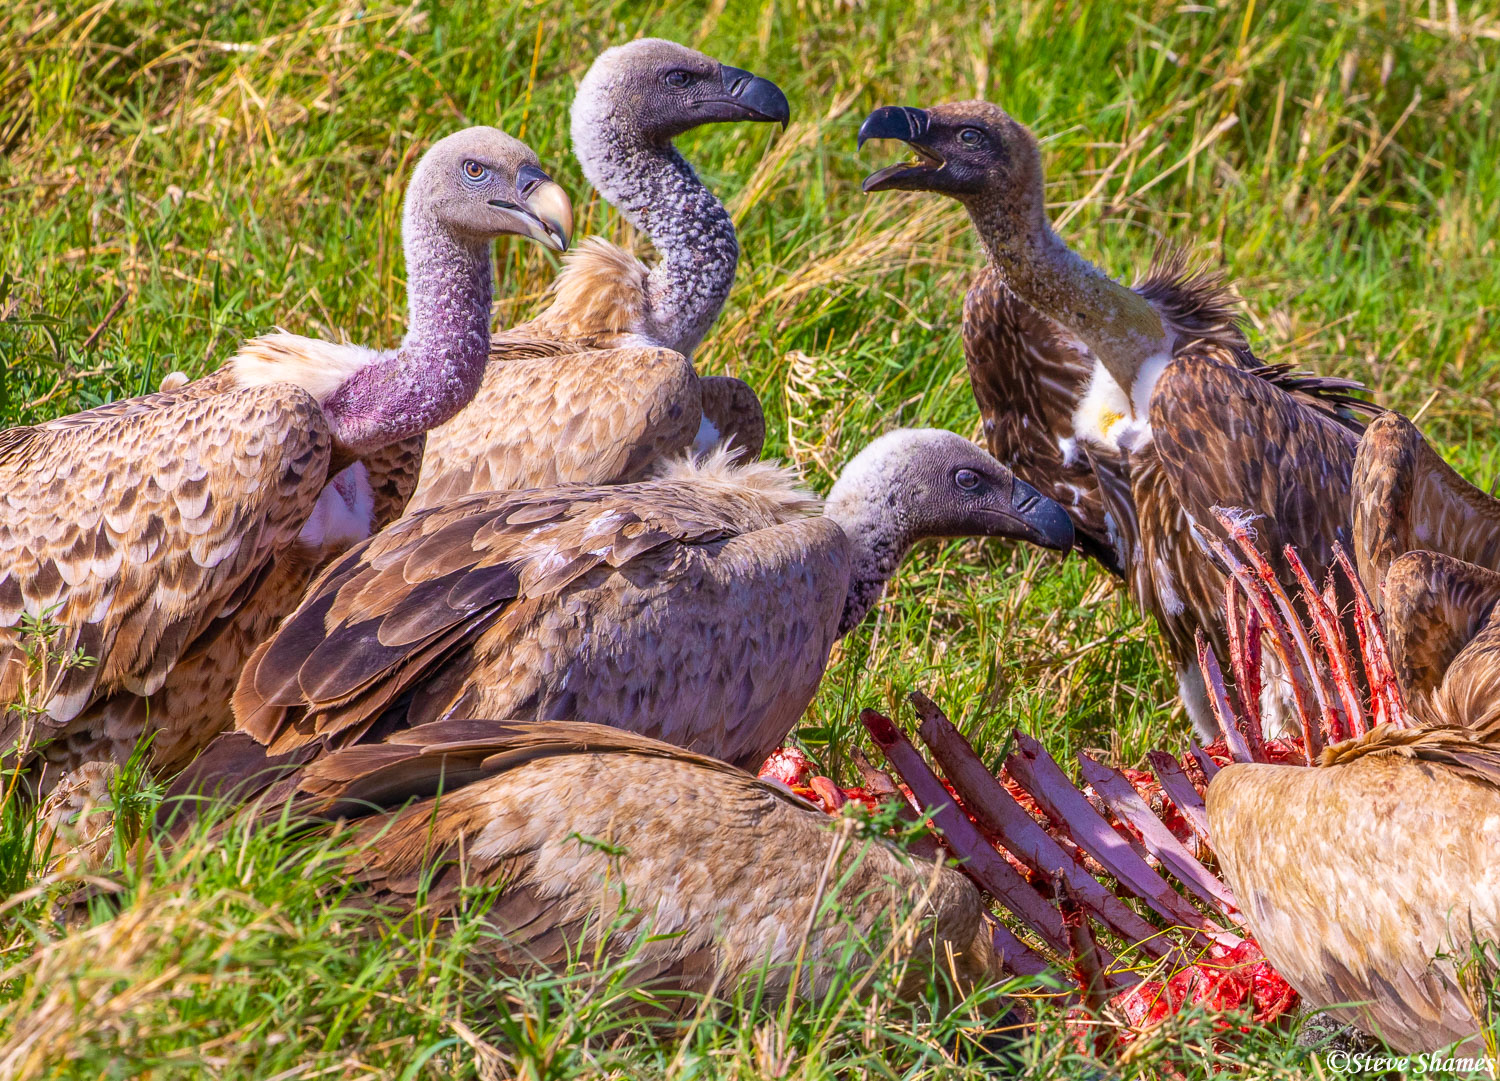 Vultures picking the last bits of meat off the ribs, and as always, squabbling with each other.